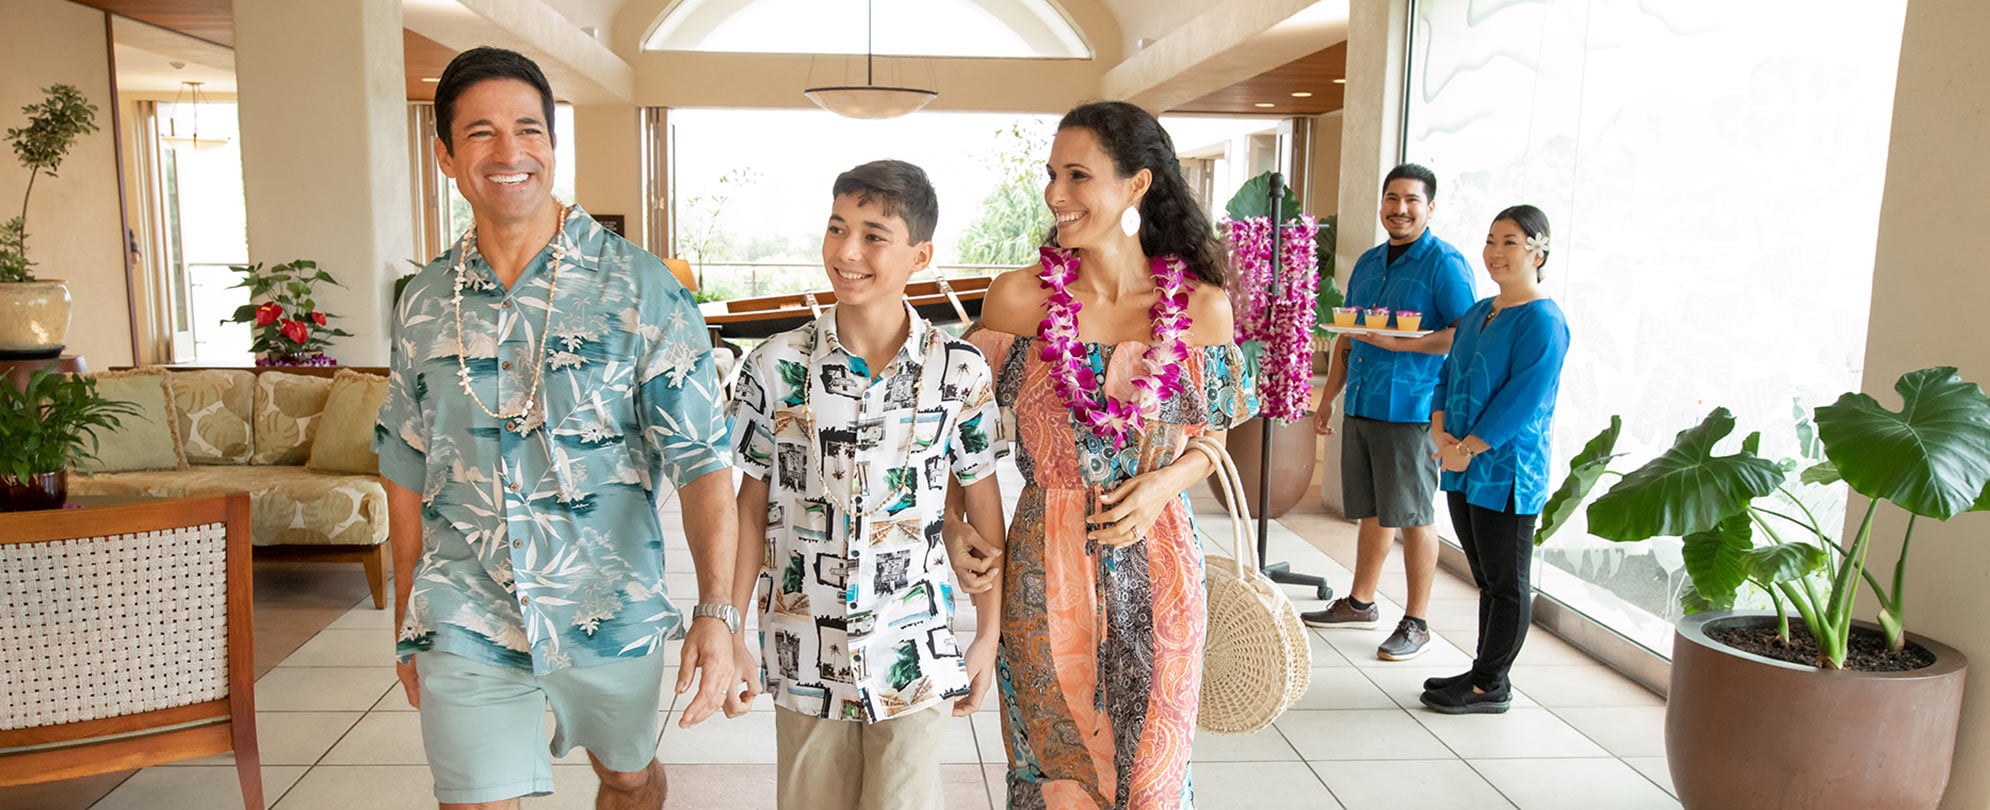 A mom, dad, and son walk through a Club Wyndham resort lobby smiling and wearing leis on their summer vacation.